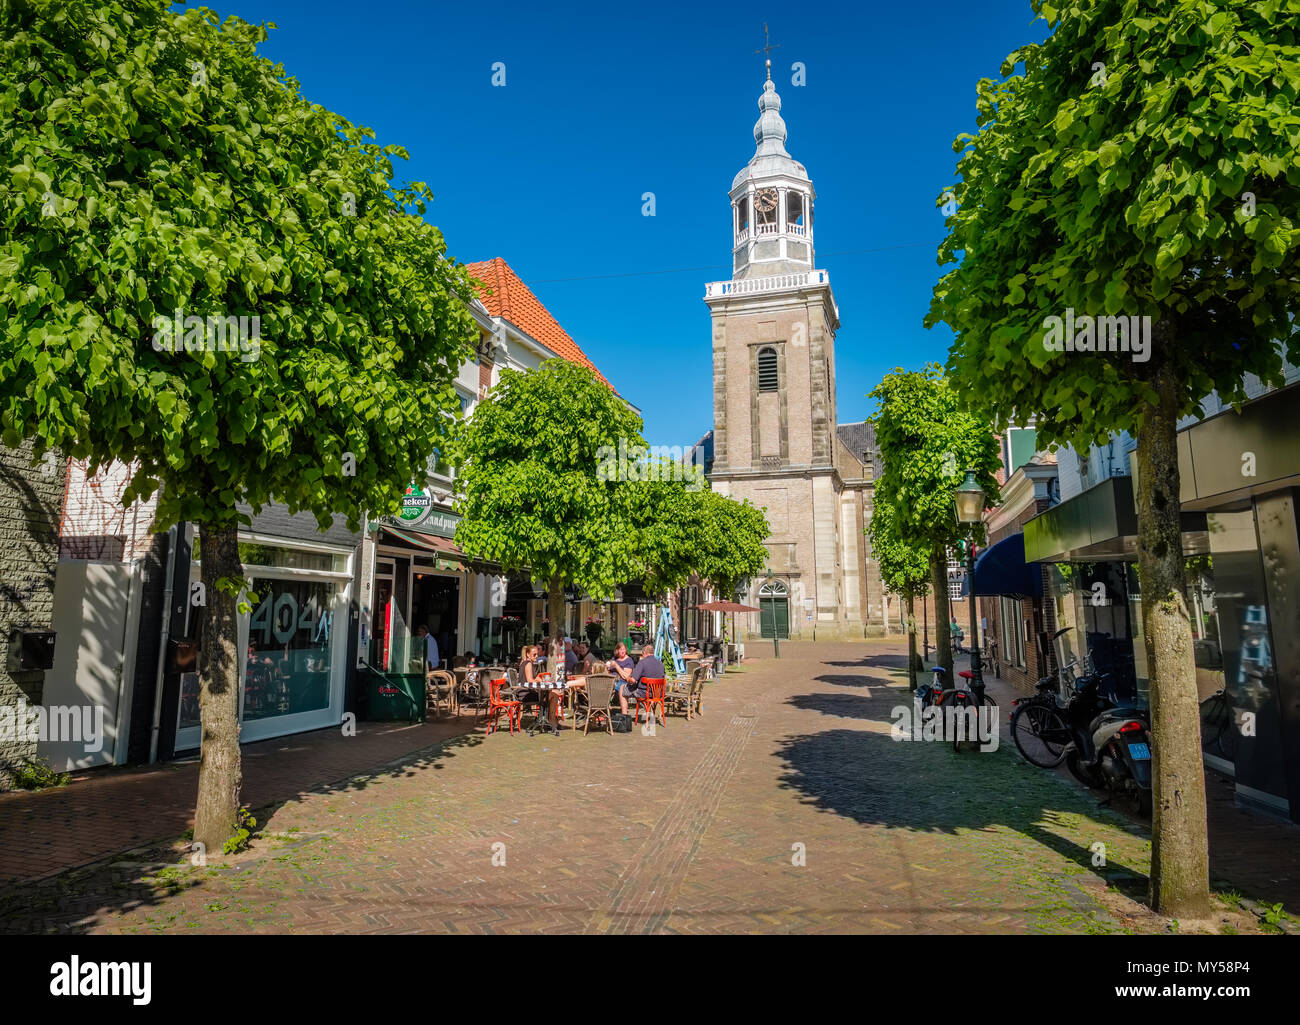 The Big Church of Almelo (De Grote Kerk) was founded in 1236. The oldest parts of the building dates back to 1493. It is the oldest building of Almelo. Stock Photo